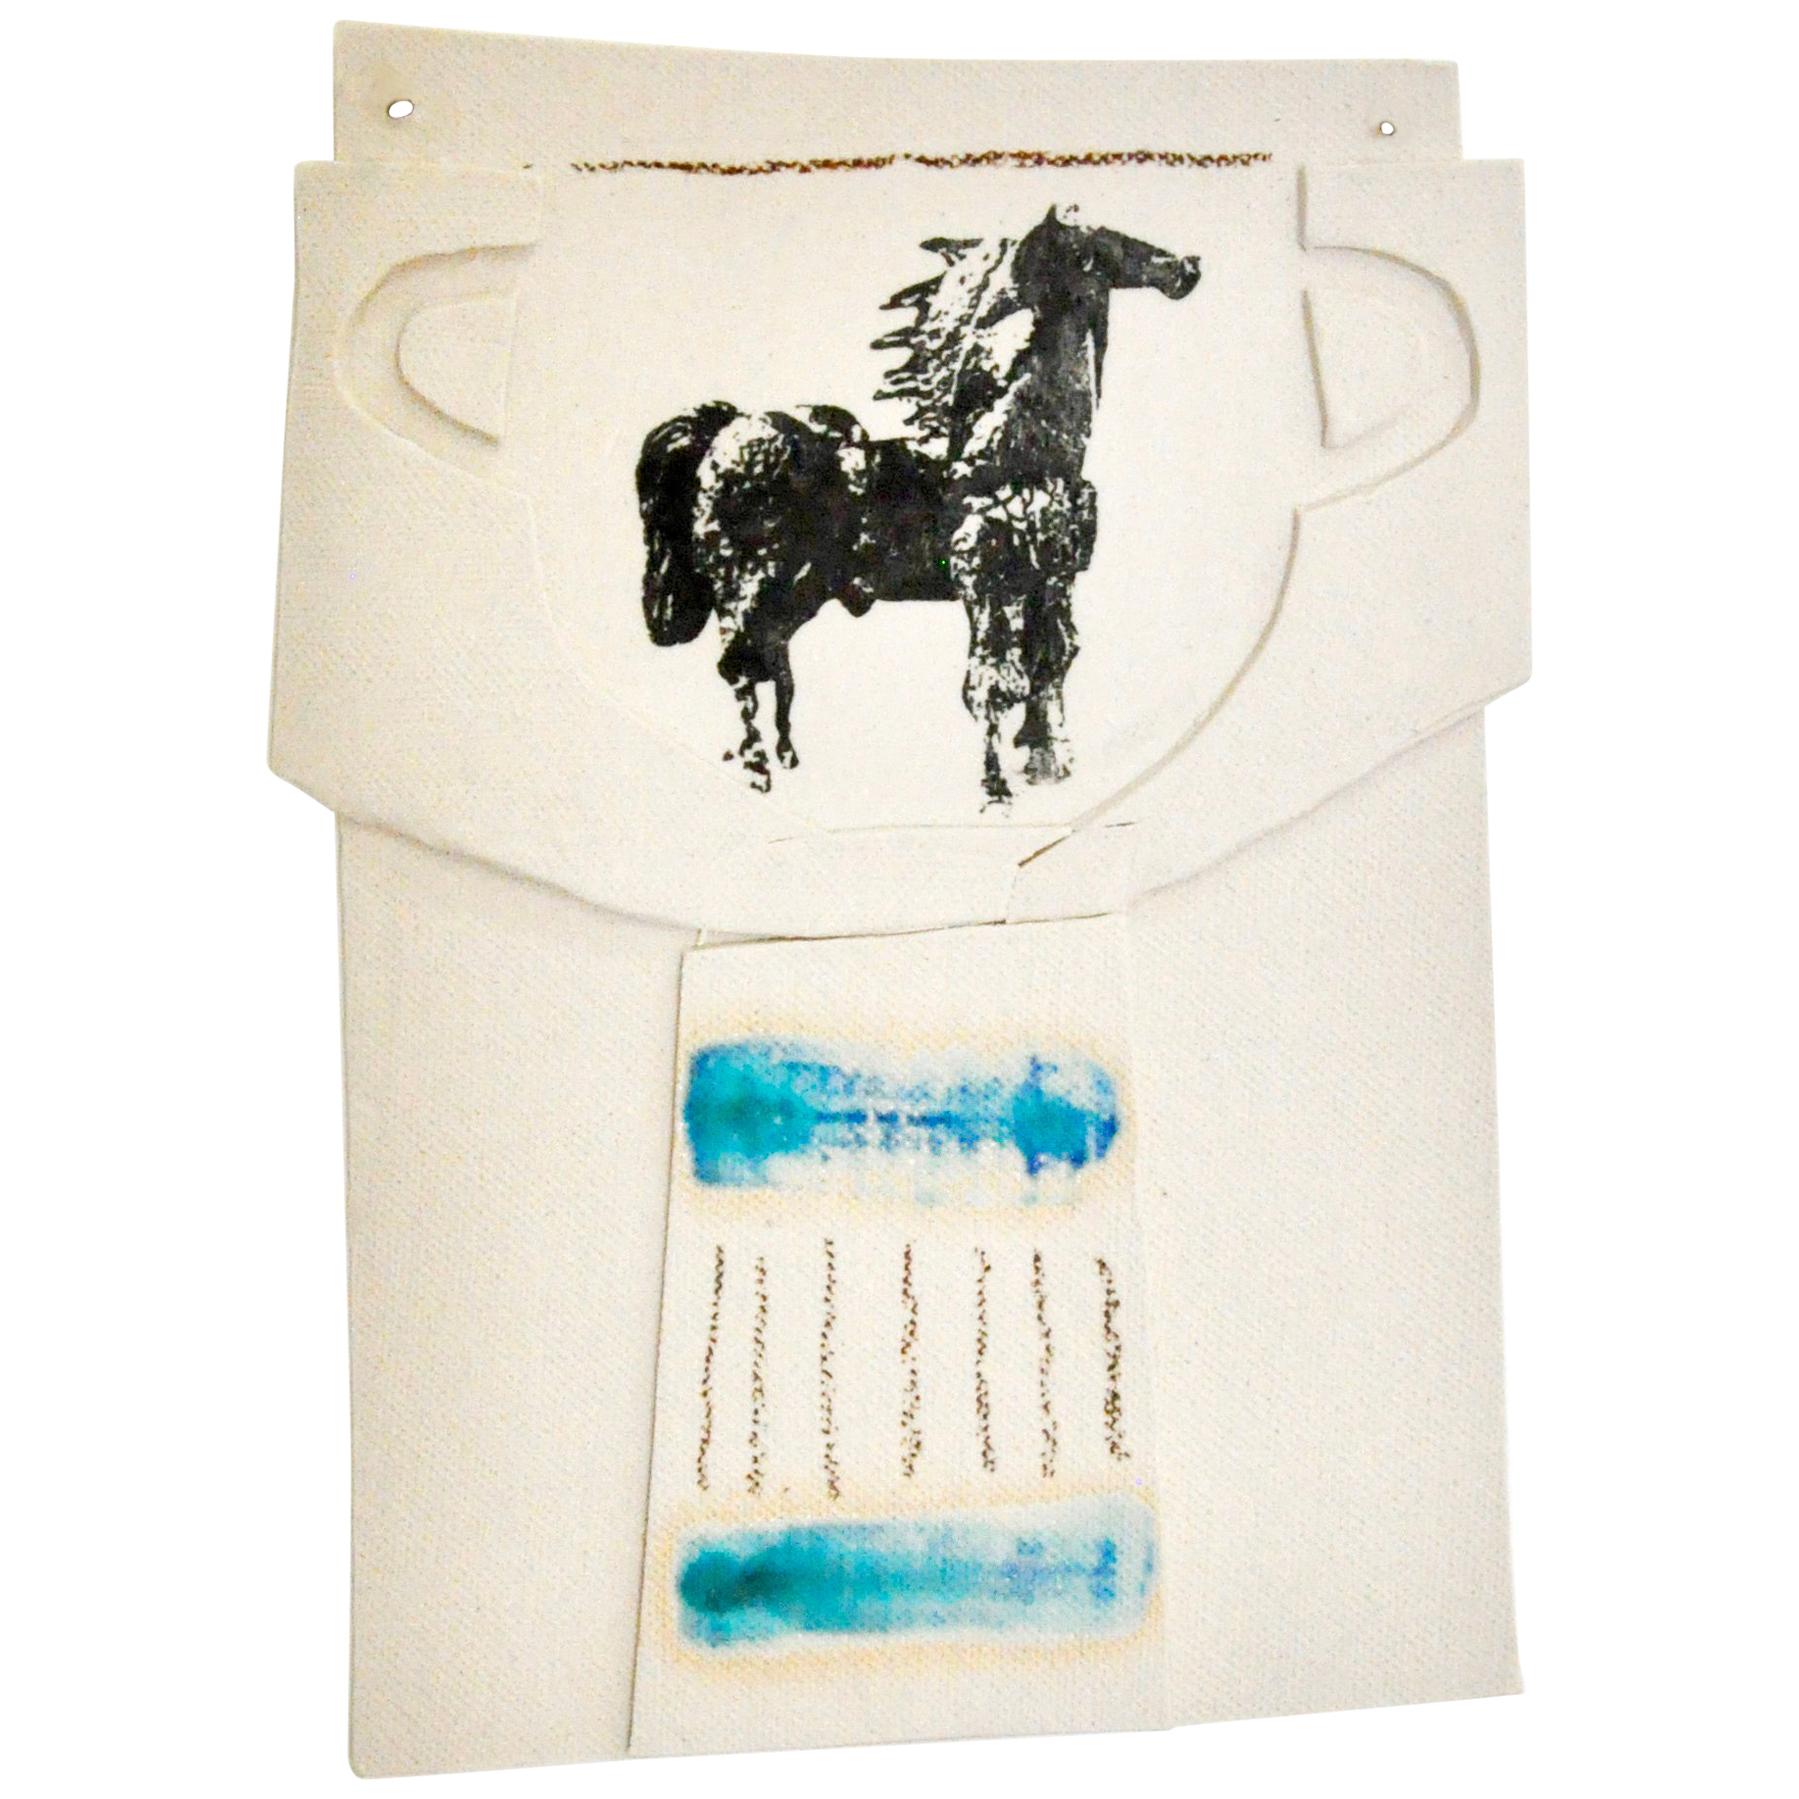 Ceramic and Mixed-Media Vase Collage Wall Hanging with Horse by Alison Owen For Sale